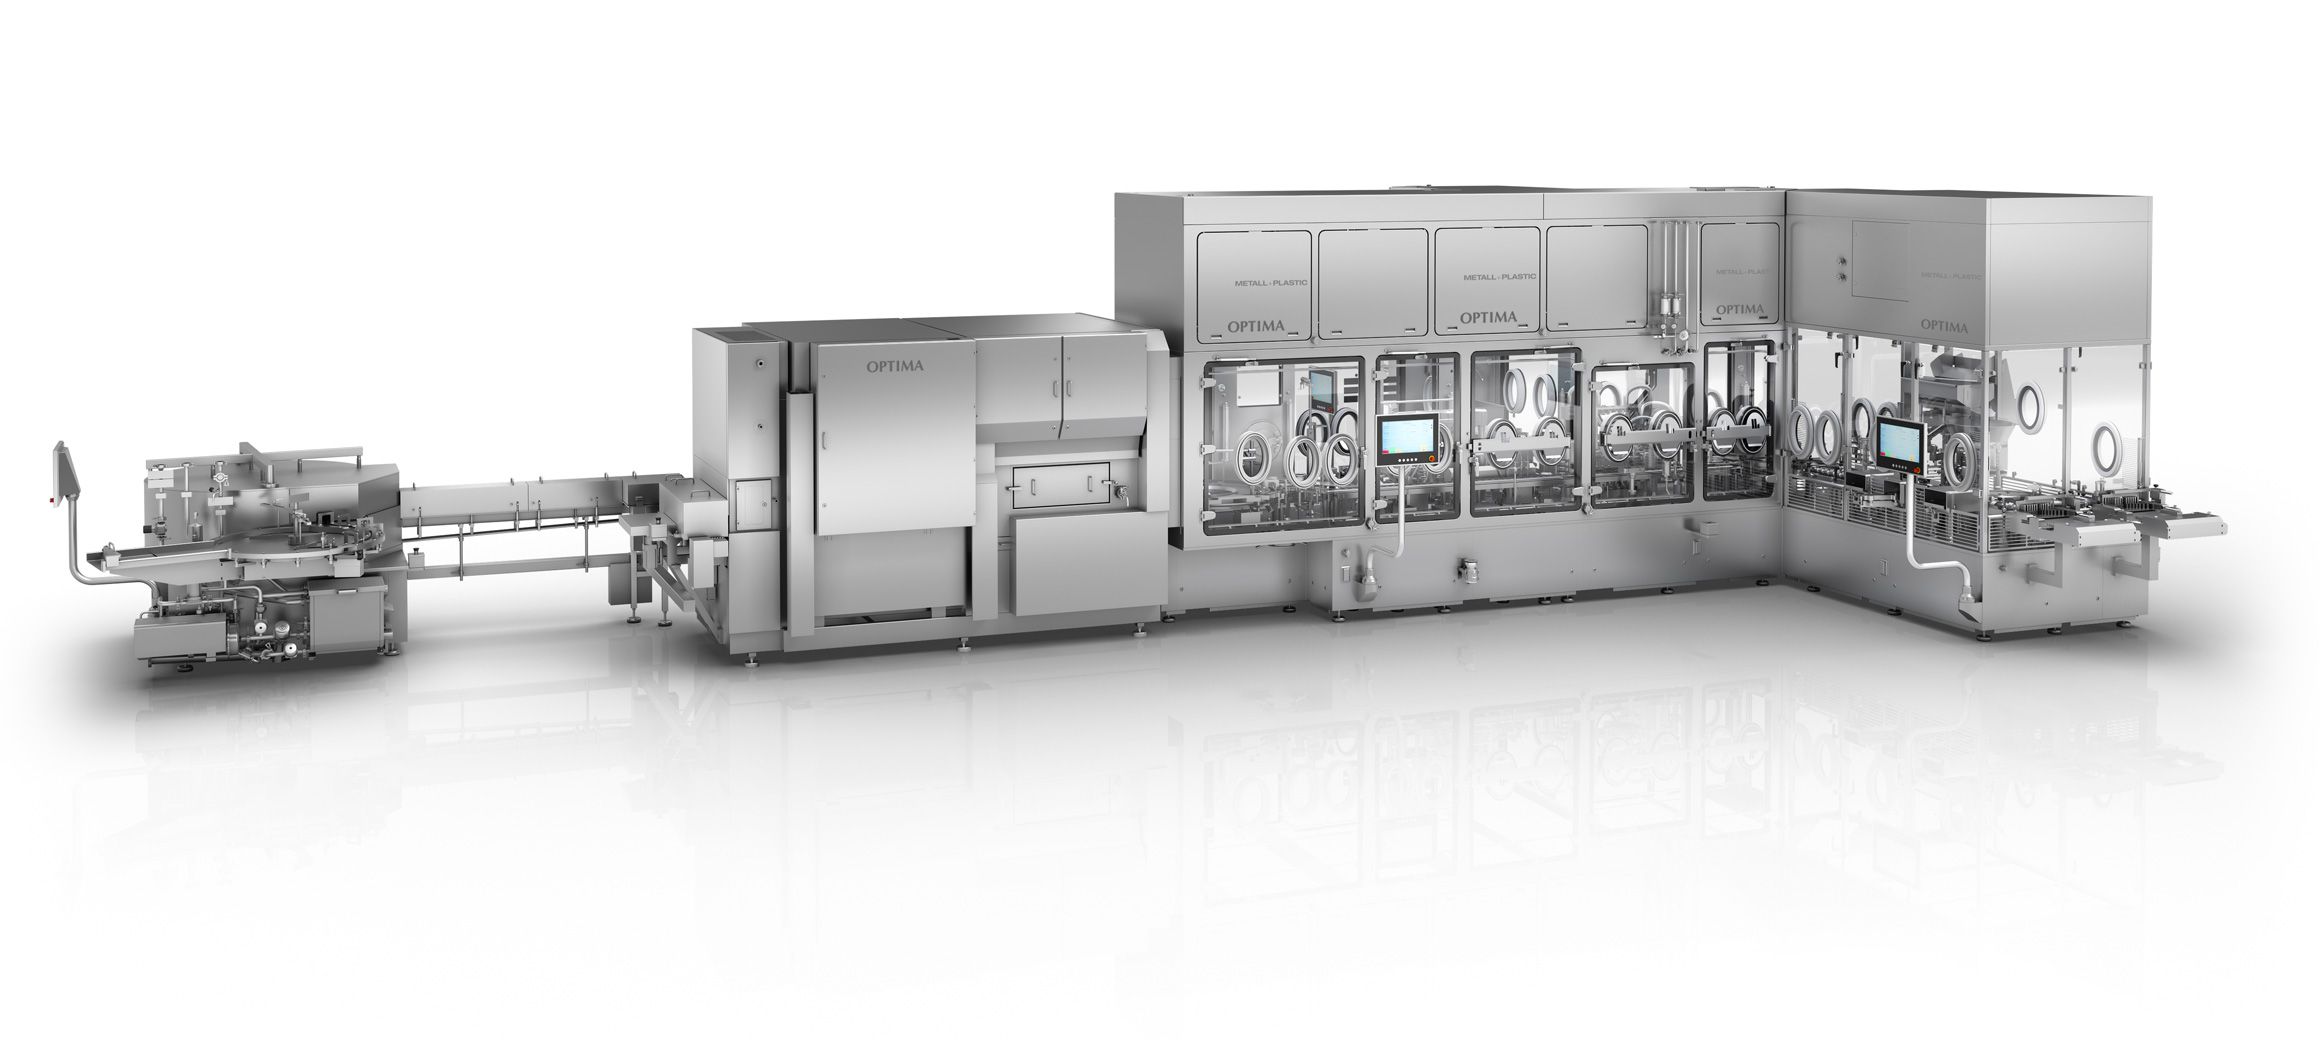 Ultra-compact C6015 and C6030 Industrial PCs in pharmaceutical production plants